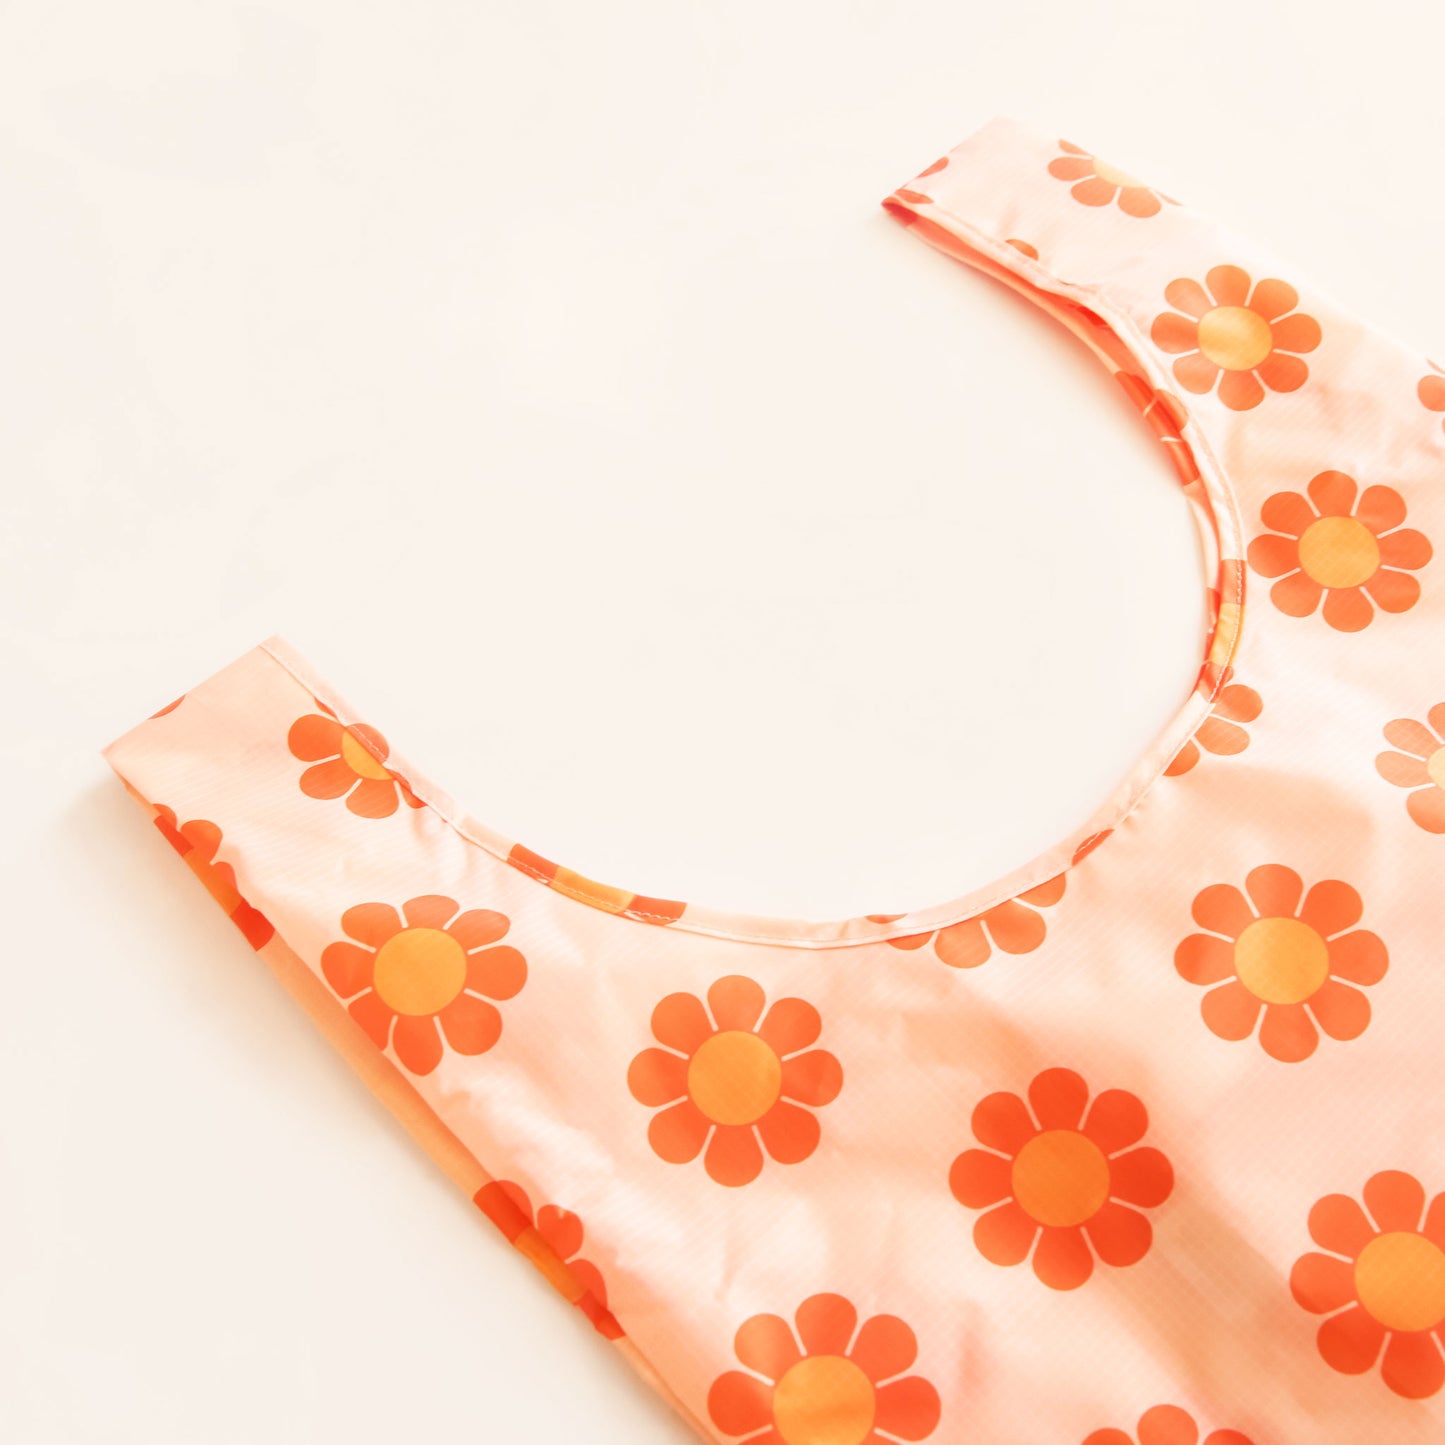 Peach reusable bag filled with a pattern of flowers with red-orange petals and tangerine centers. The bag is positioned flat on a table and has a 'U' shape between two handles. 